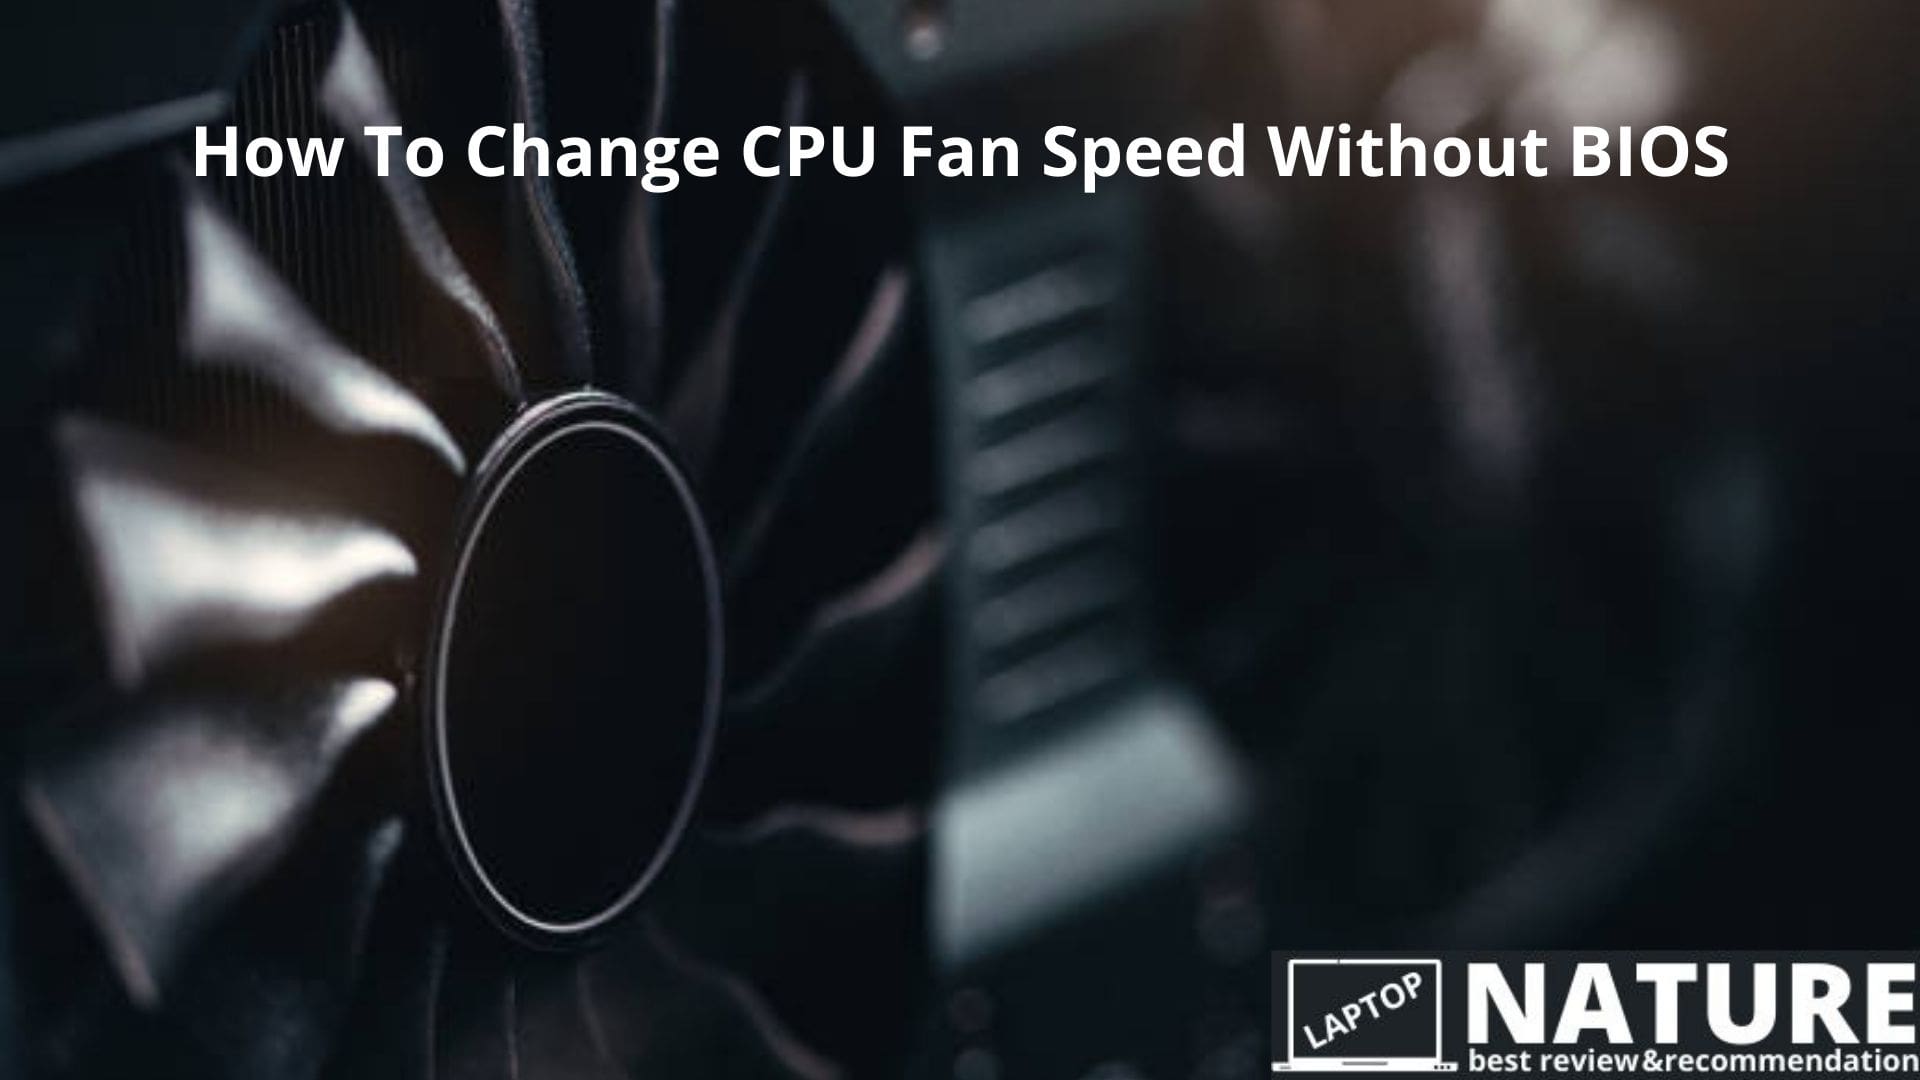 how to change cpu fan speed without bios